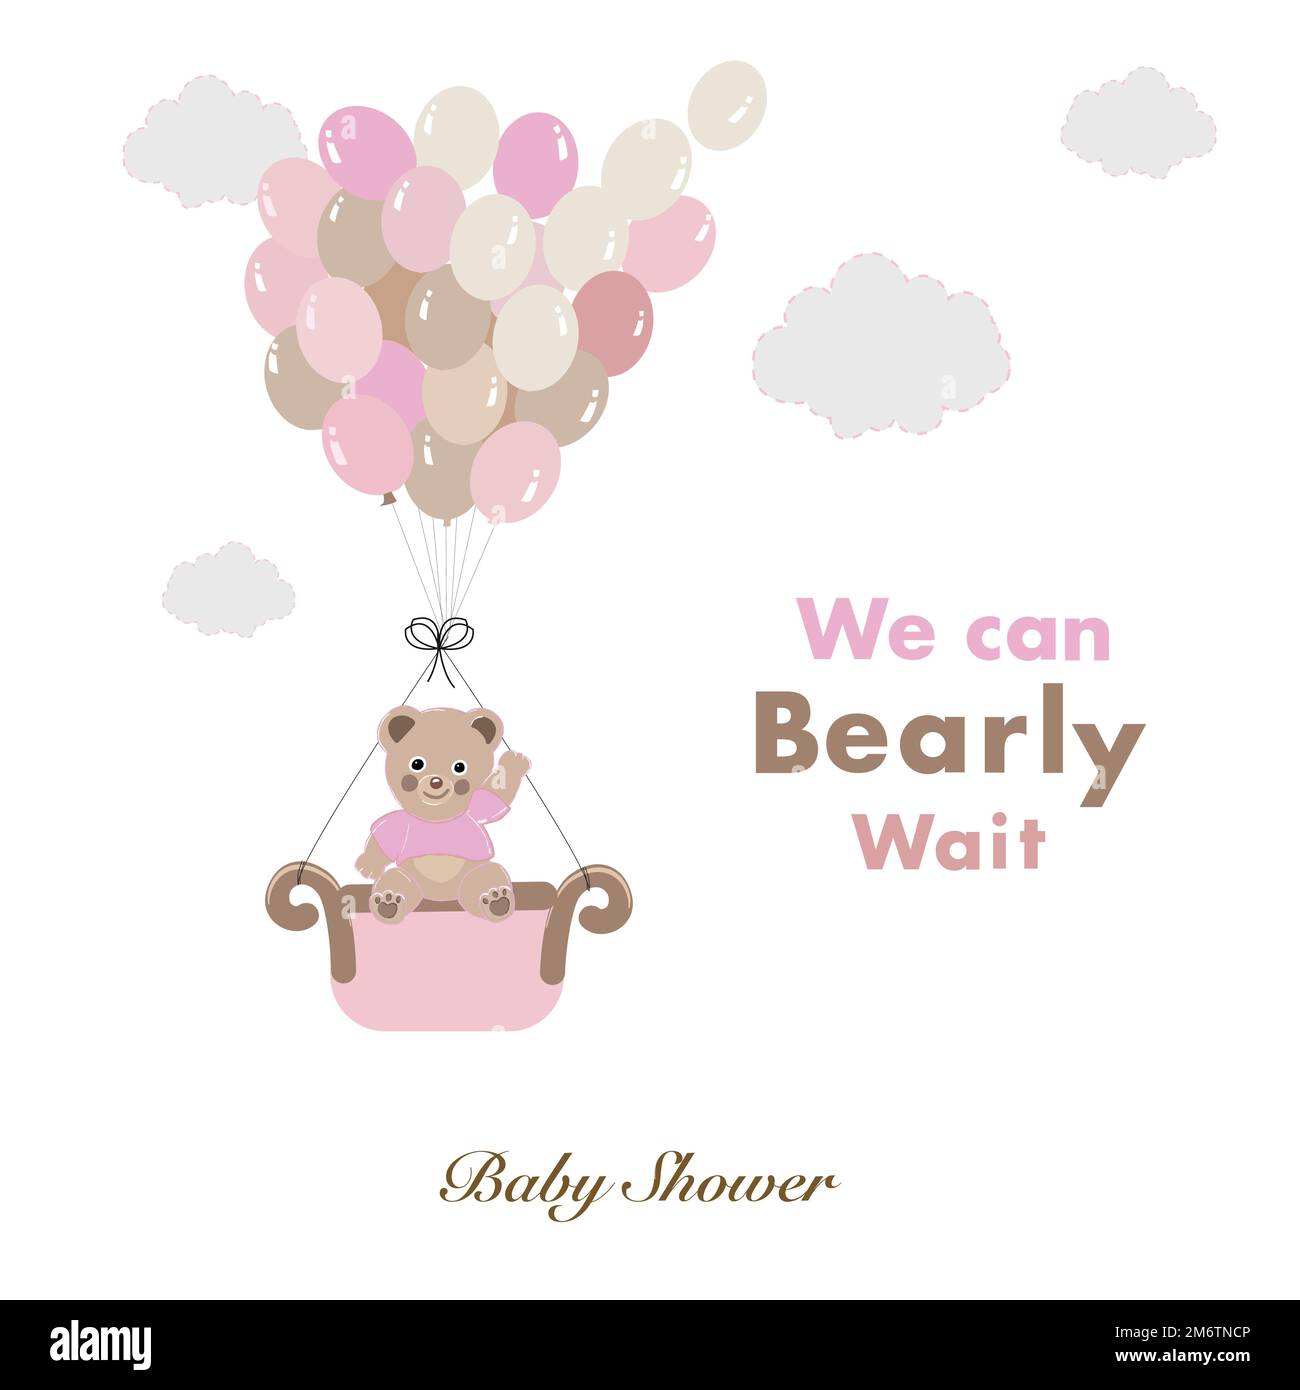 We can bearly wait text with teddy bear and a lot of balloons Stock Vector